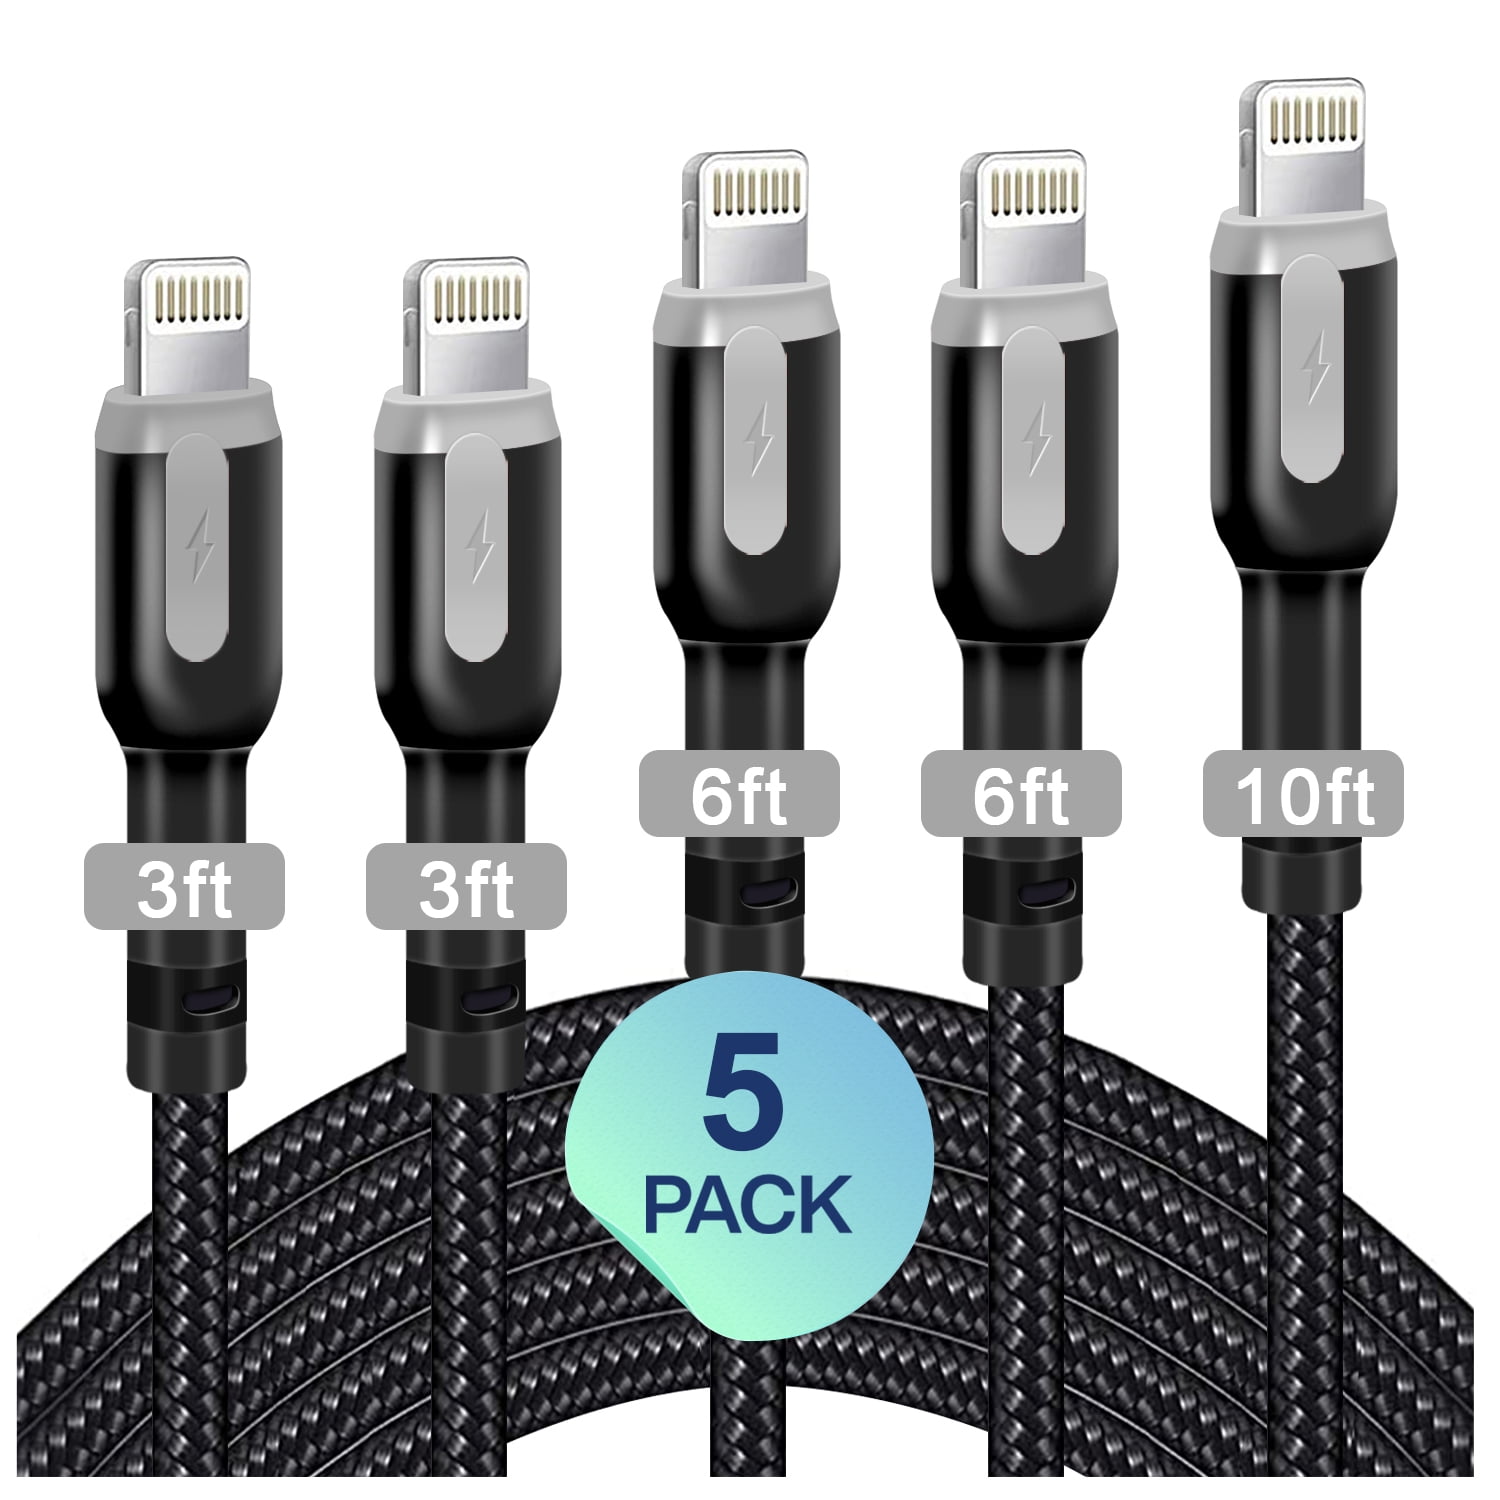 Mfi Certified Lightning Cables 5Pack 2x3Ft 2x6Ft 10Ft to USB Syncing Data and Nylon Braided Cord Charger for iPhone XS/Max/XR/X/8/8Plus/7/7Plus/6S/Plus/SE/iPad and More iPhone Charger 